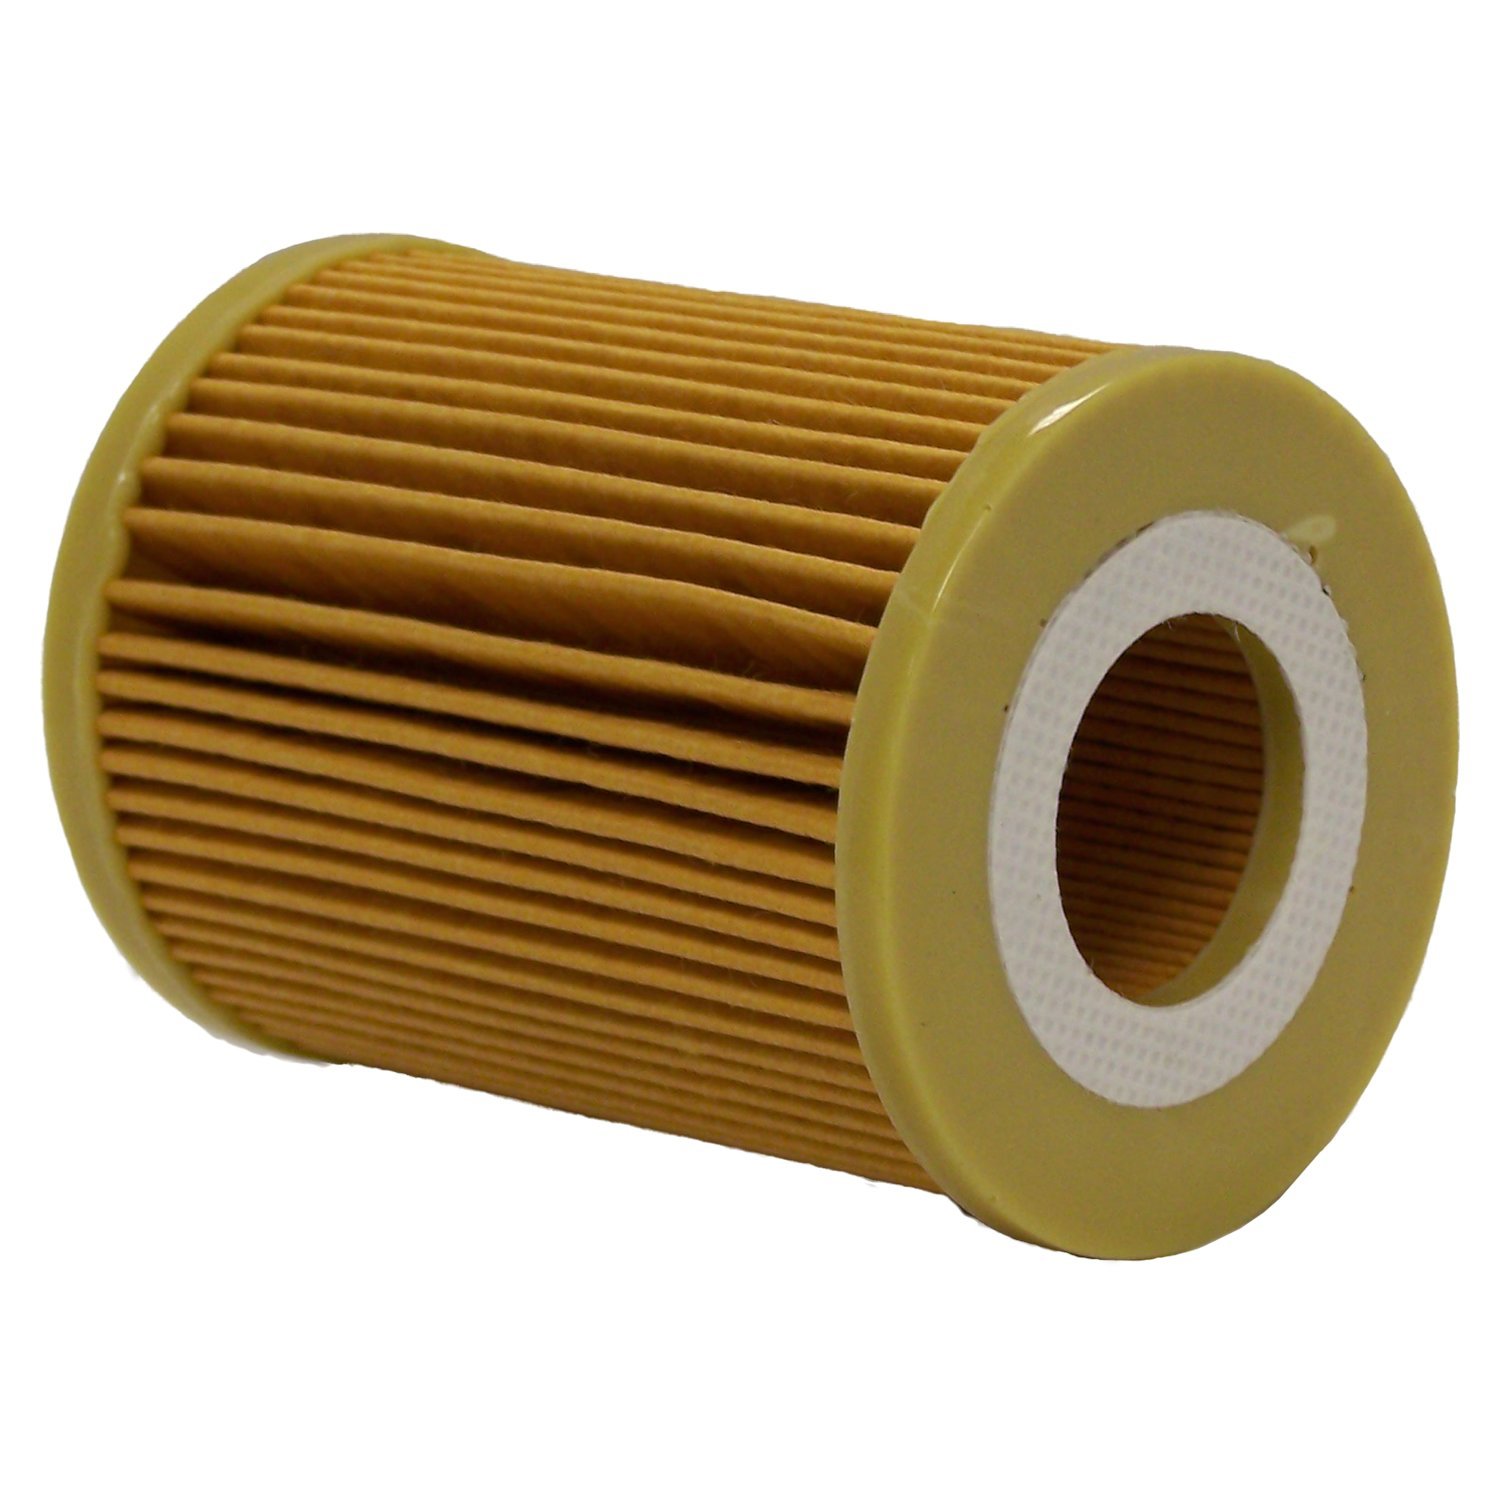 Oil Filter for Various Jeep & Chrysler Vehicles w/ 3.0L Diesel Engines